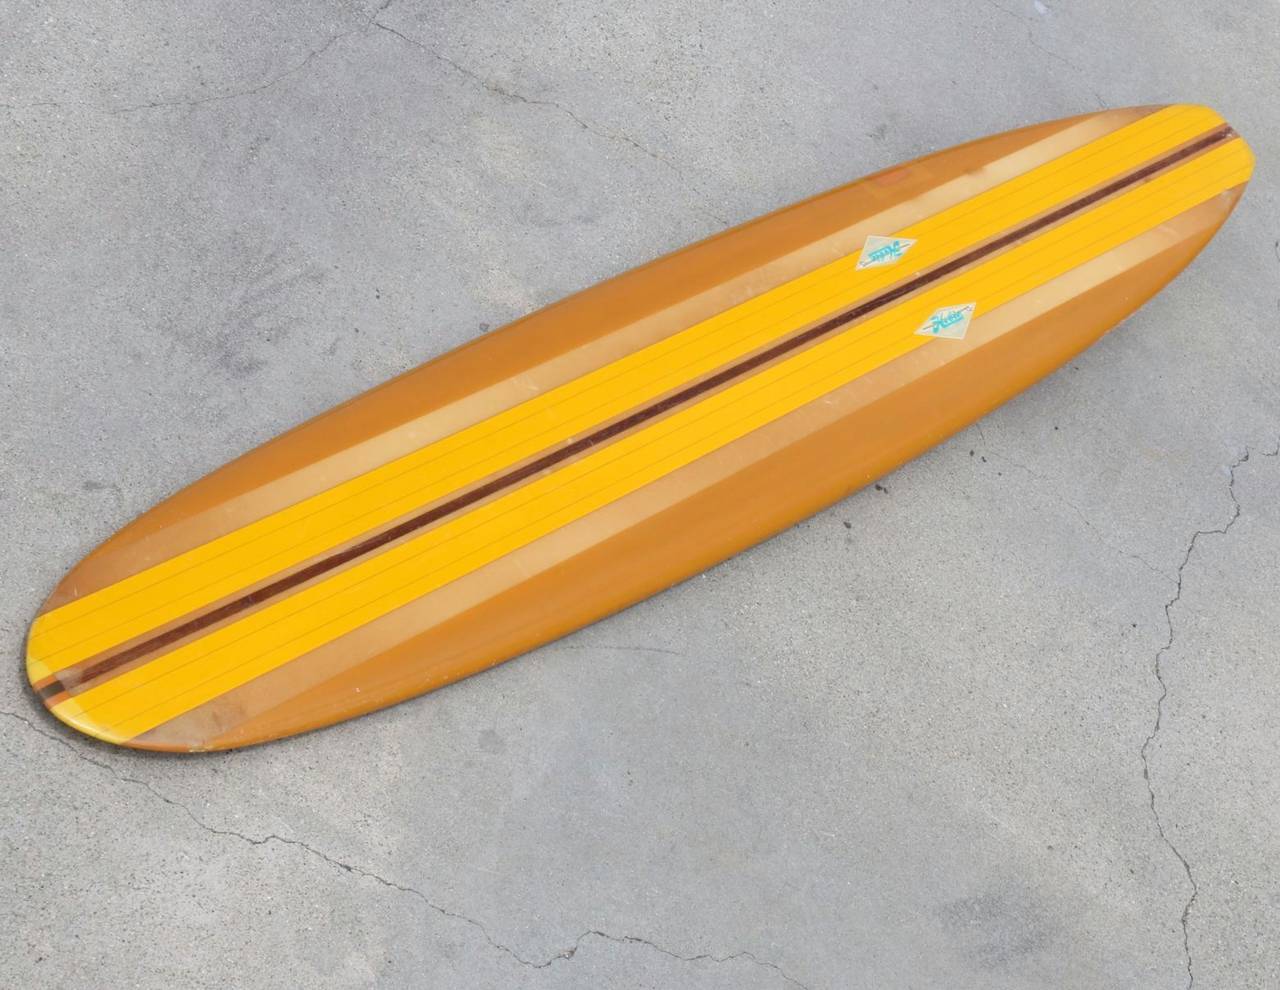 This classic longboard from the days of Beach Boys music and 1960s long boarding warms our heart.  Just looking at it conjures up dreams of California's golden surf years. At 9 feet, 11 inches long and a thick redwood stringer running down it's